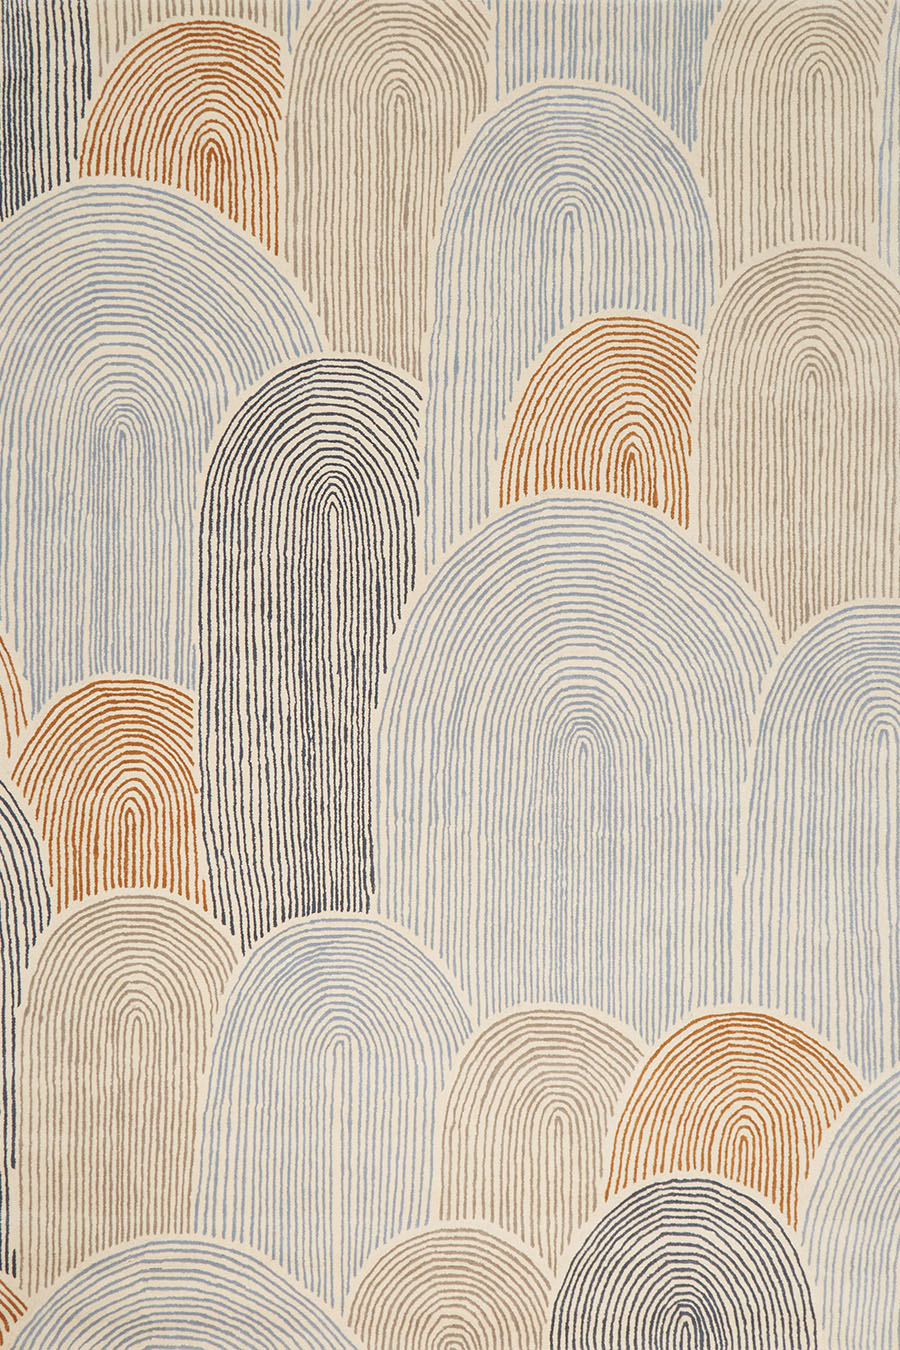 Haven by Patricia Braune - Hand Tufted Designer Rugs